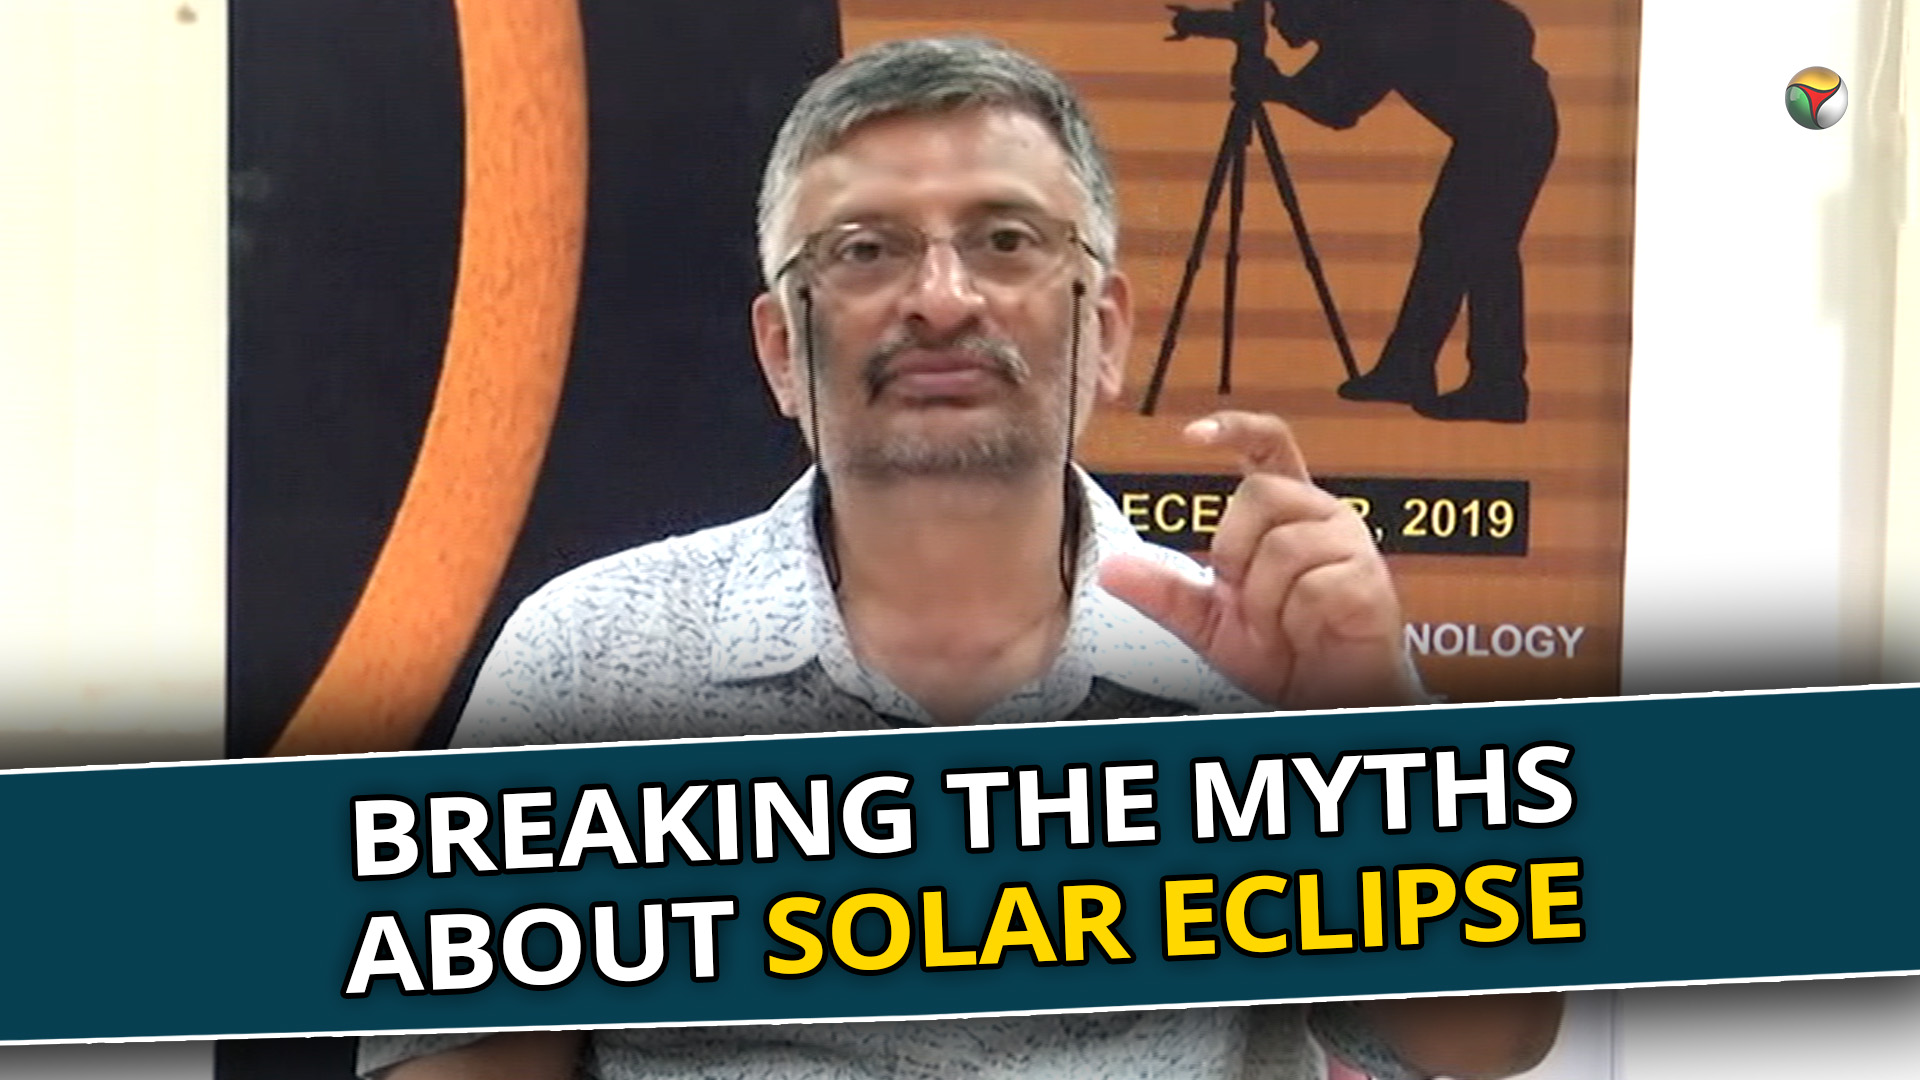 Breaking the myths about solar eclipse